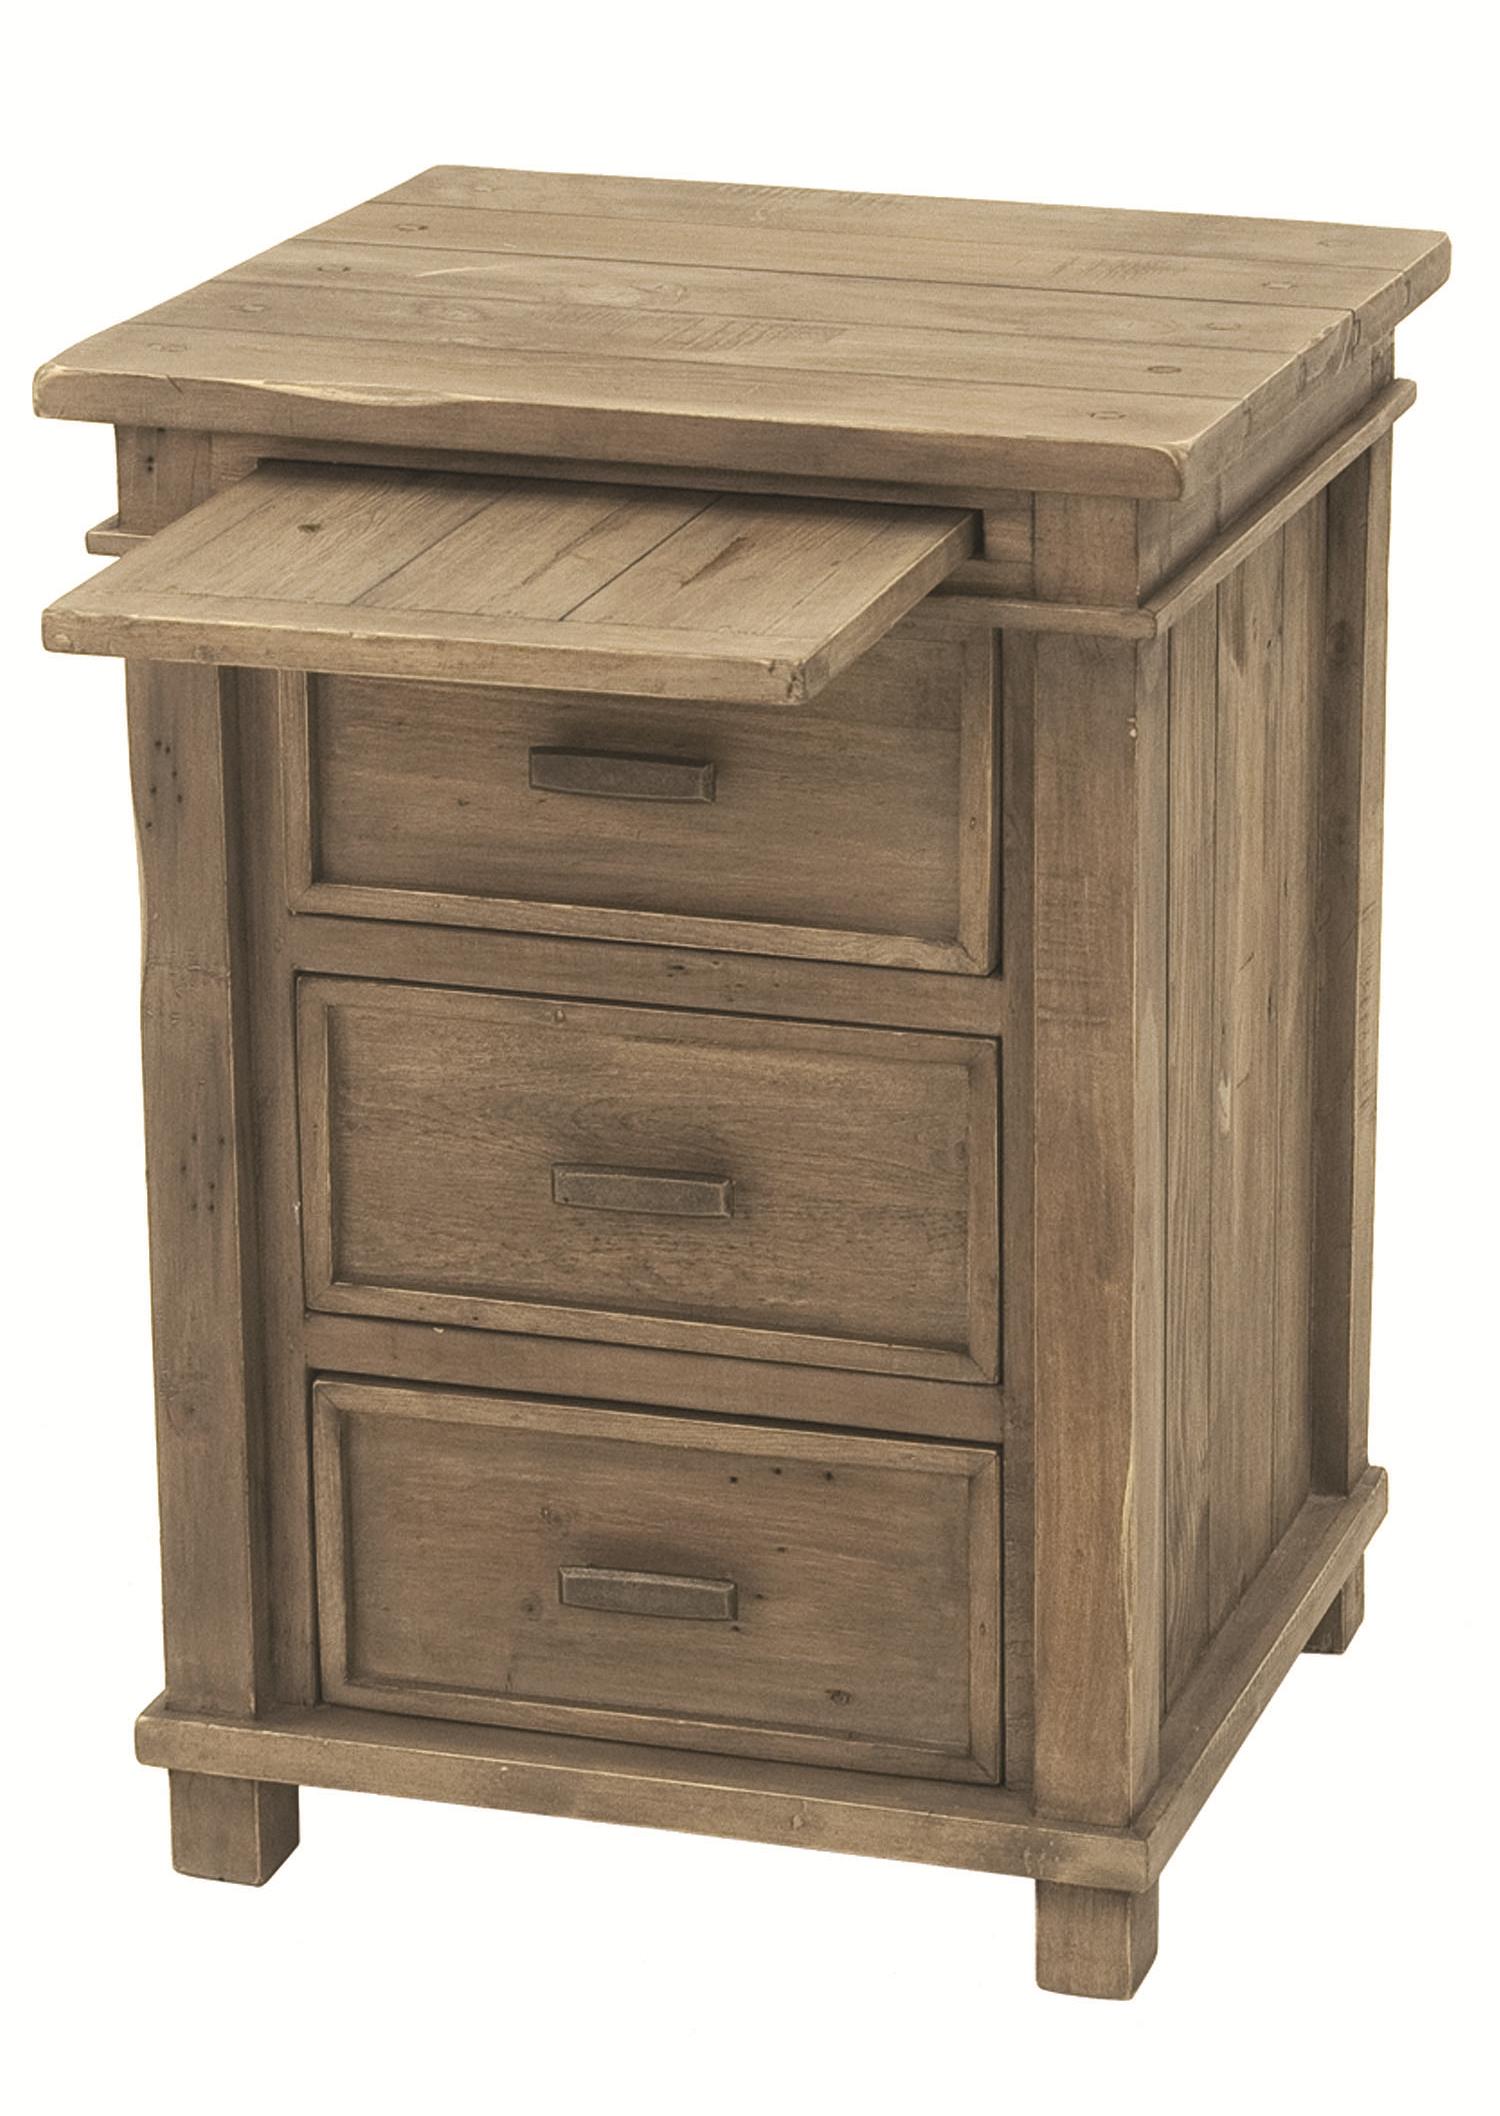 3-Drawer Bedside Cabinet with Pull-Out Tray